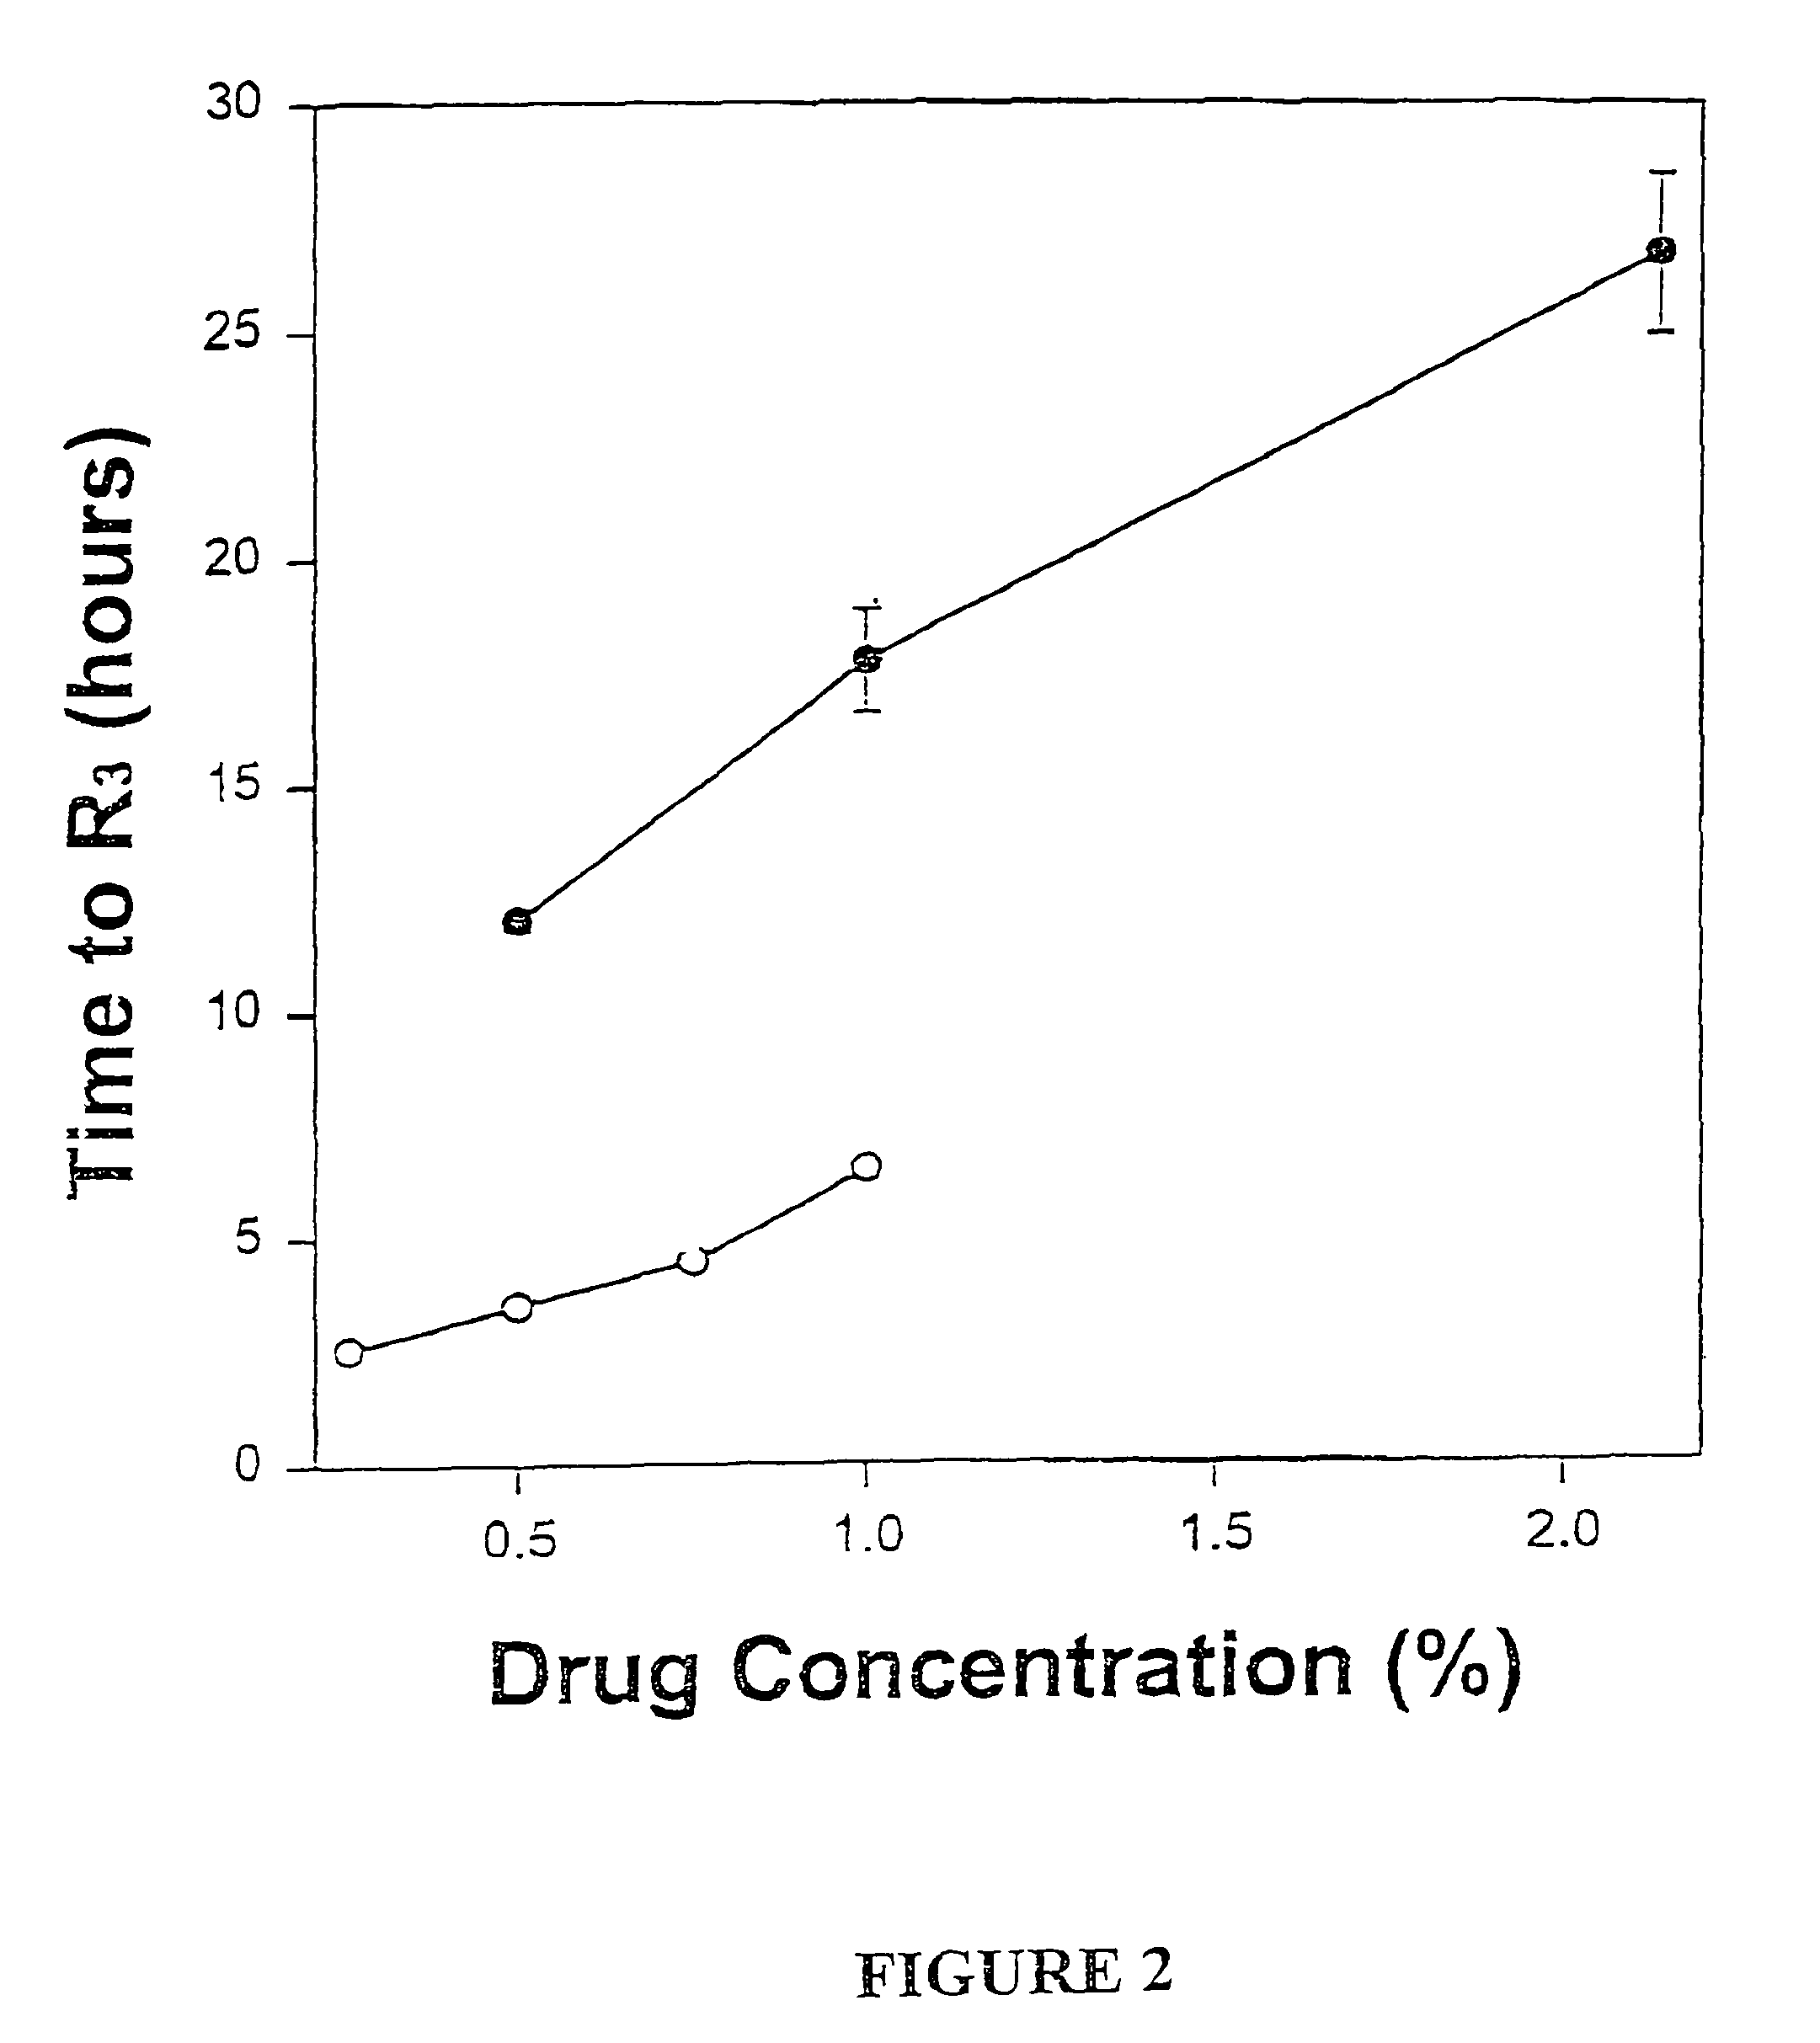 Sustained-release liposomal anesthetic compositions